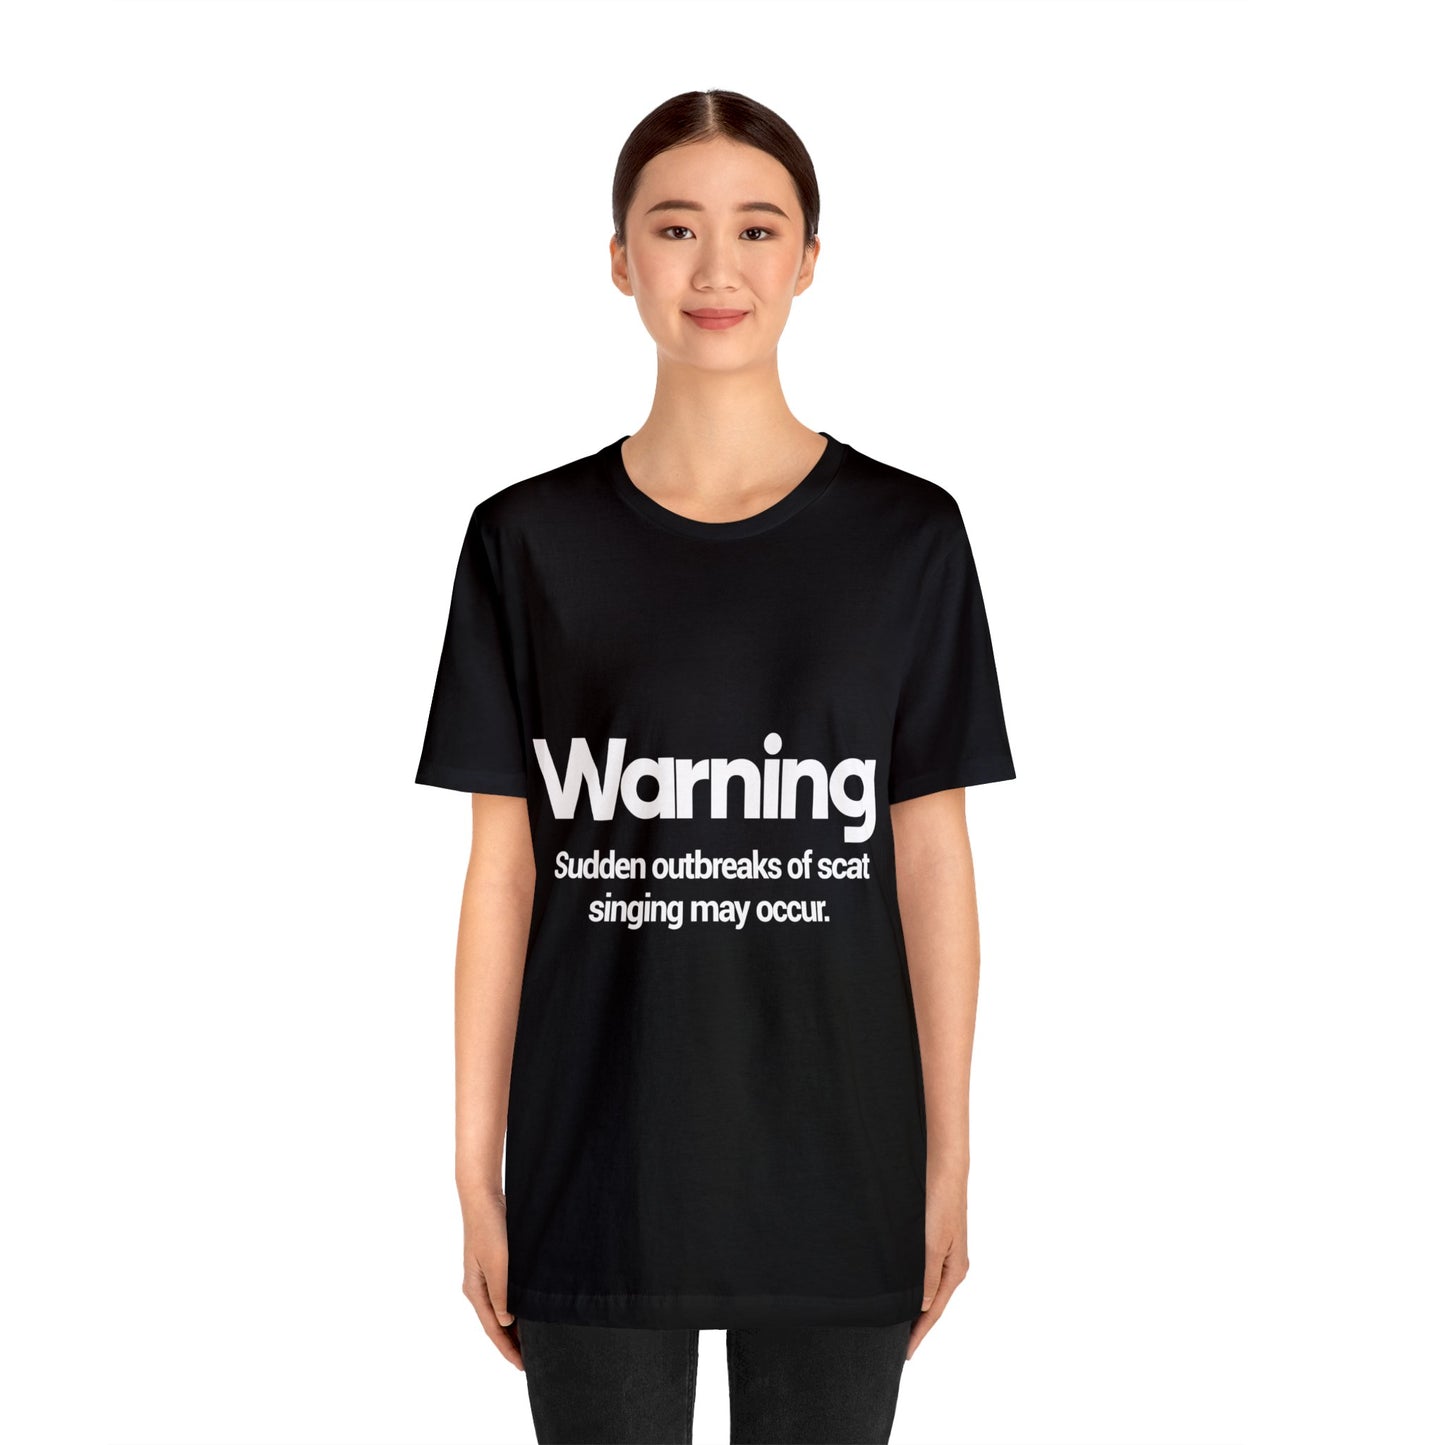 Warning, Sudden outbreaks of scat singing may occur - Unisex Jersey Short Sleeve Tee